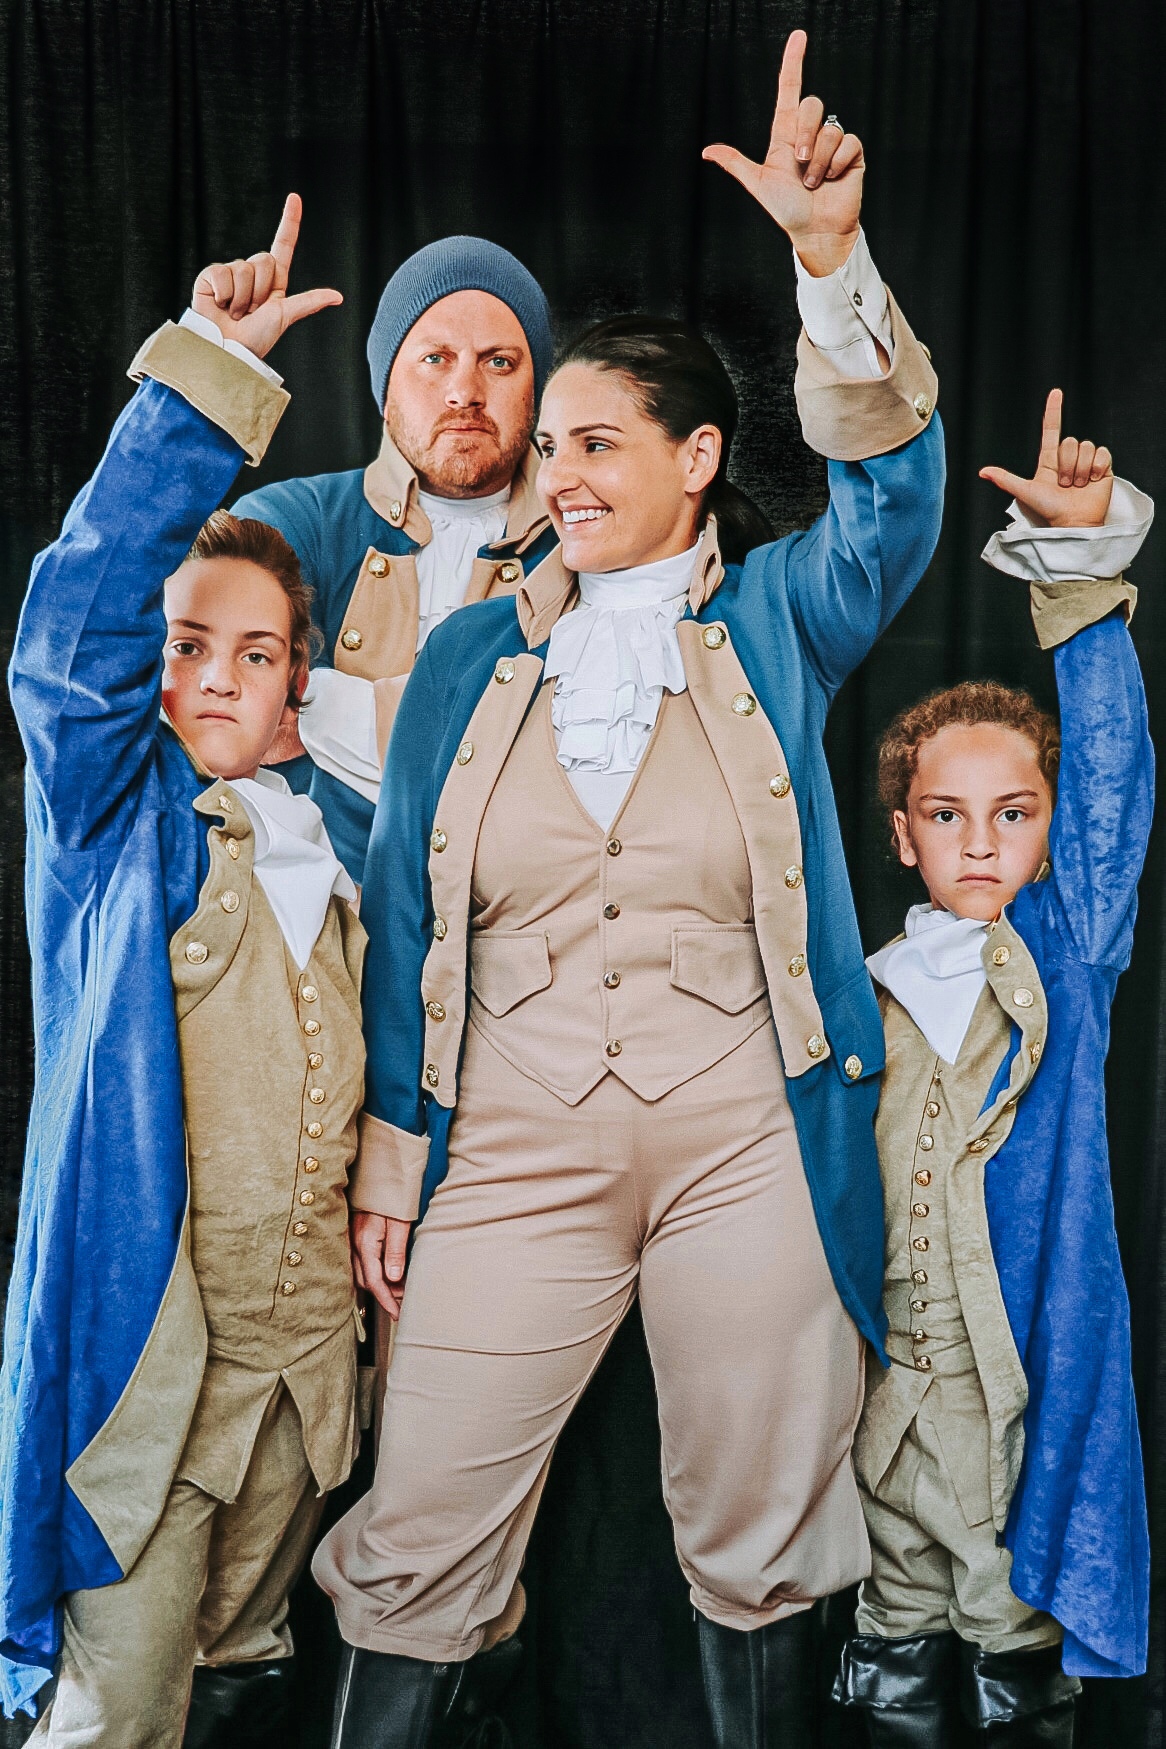 Alexander Hamilton costume with John Laurens, Hercules Mulligan, and Marquis de Lafayette costumes from the musical Hamilton